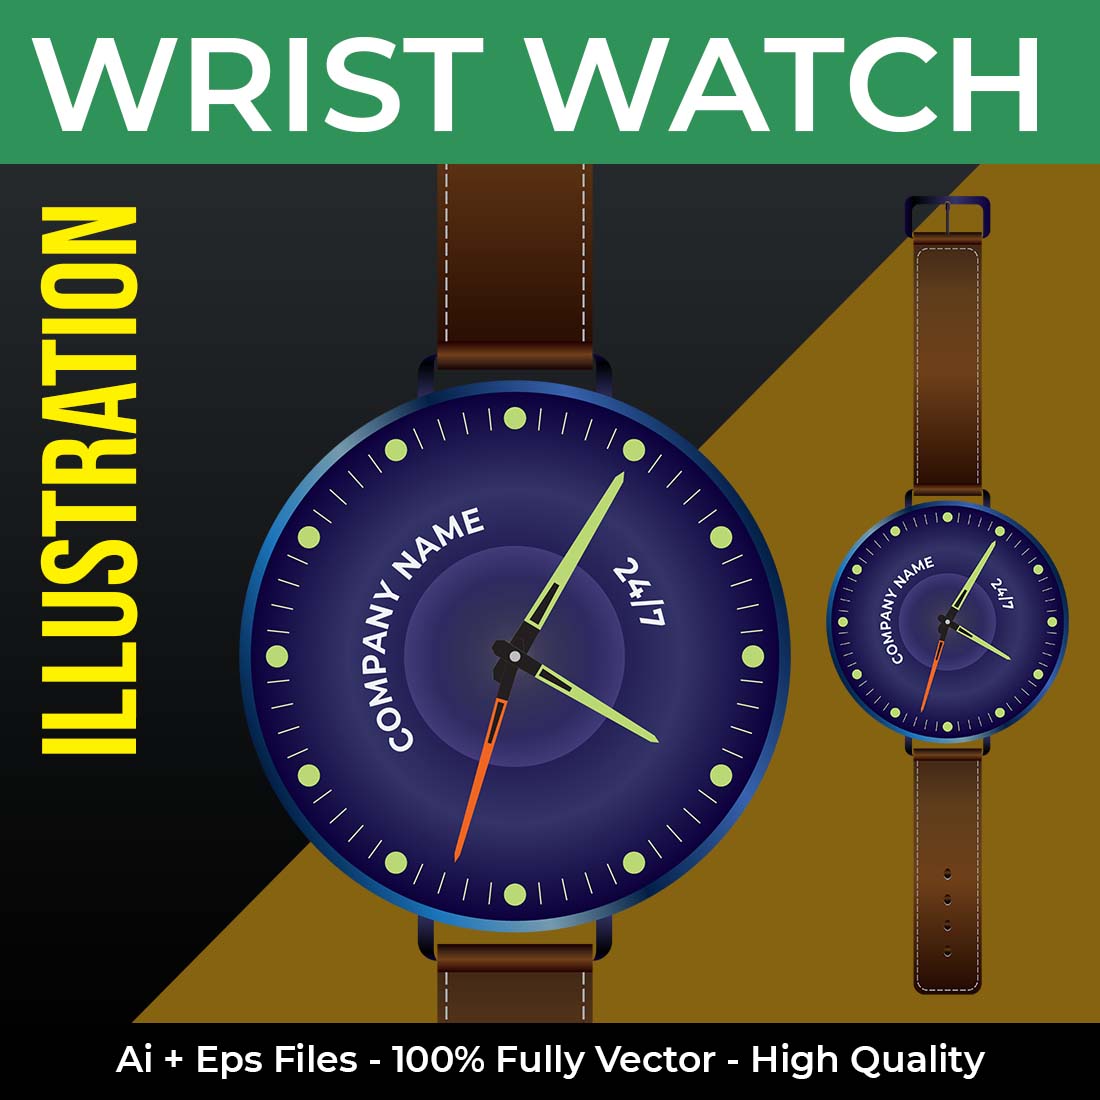 preview image Wrist Watch Illustration.